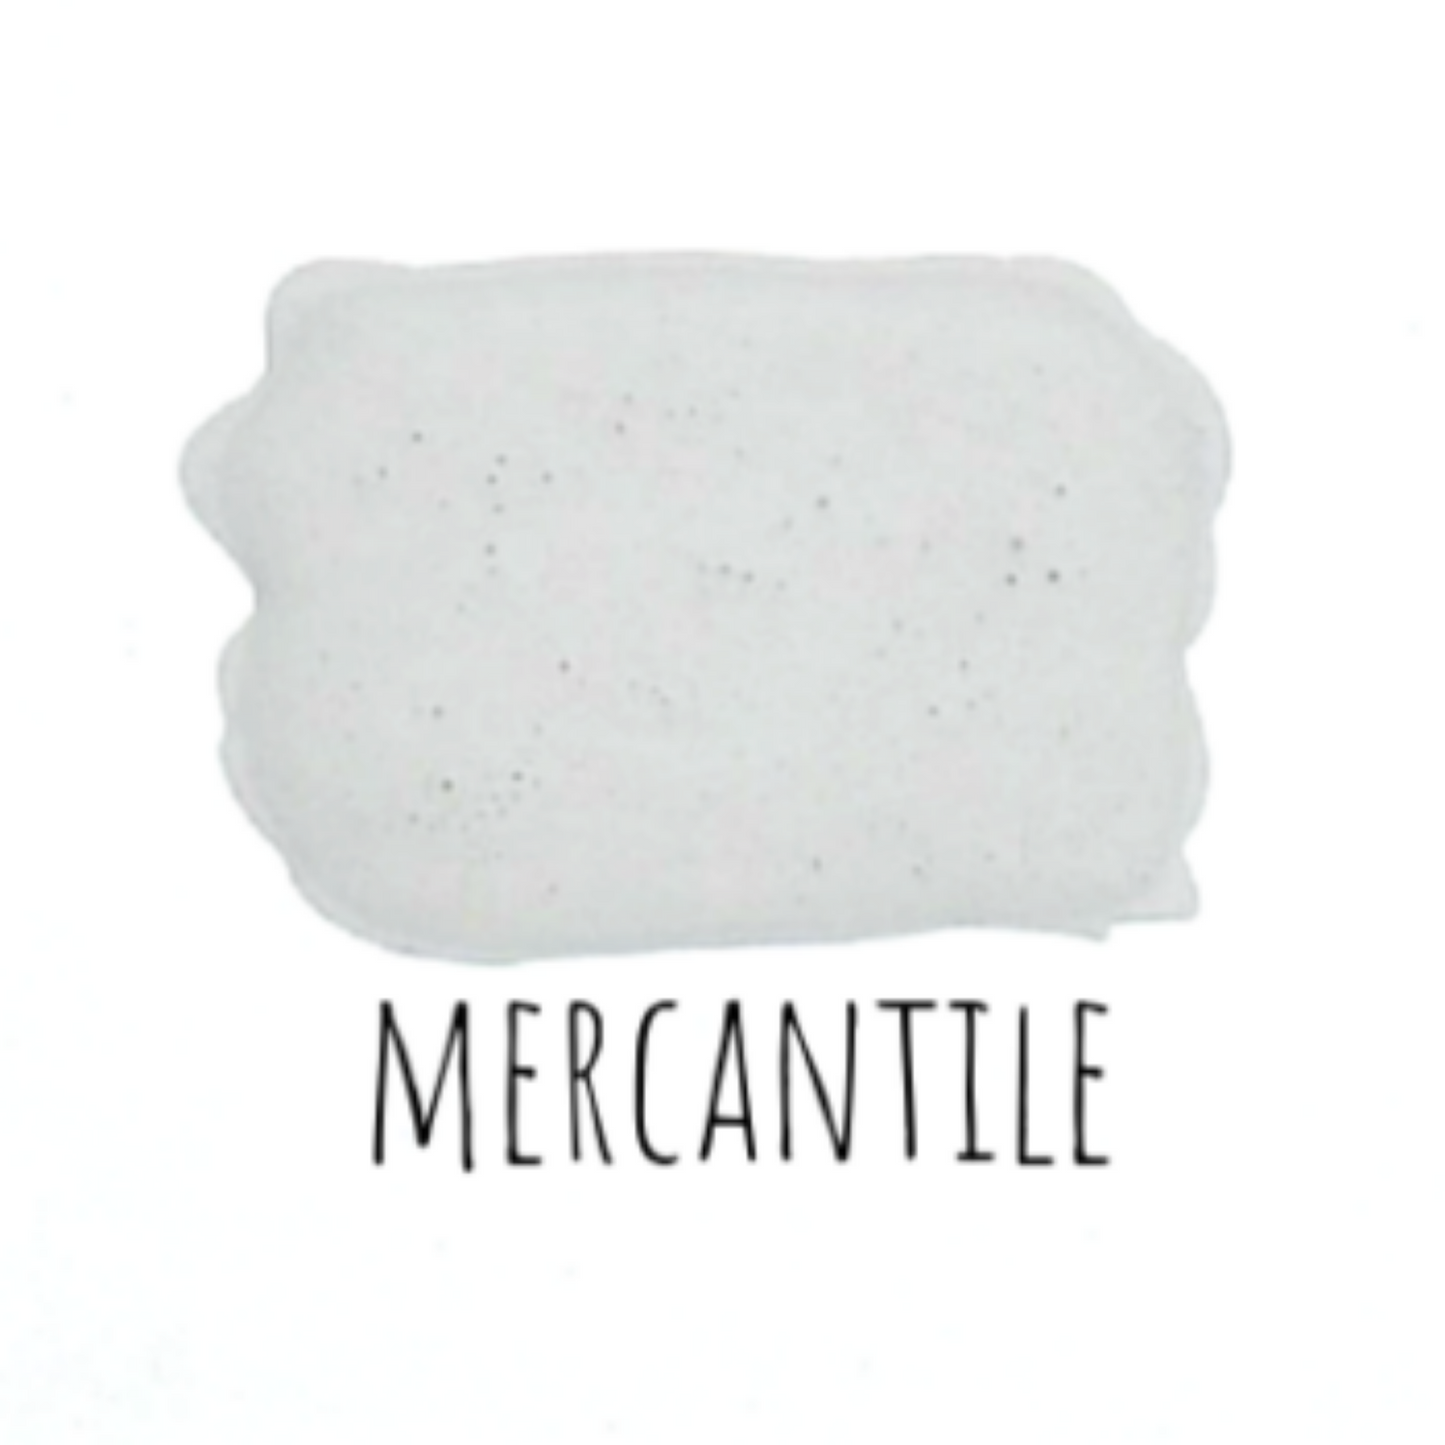 Sample paint swatch of Mercantile by Sweet Pickins Milk Paint available at Milton's Daughter